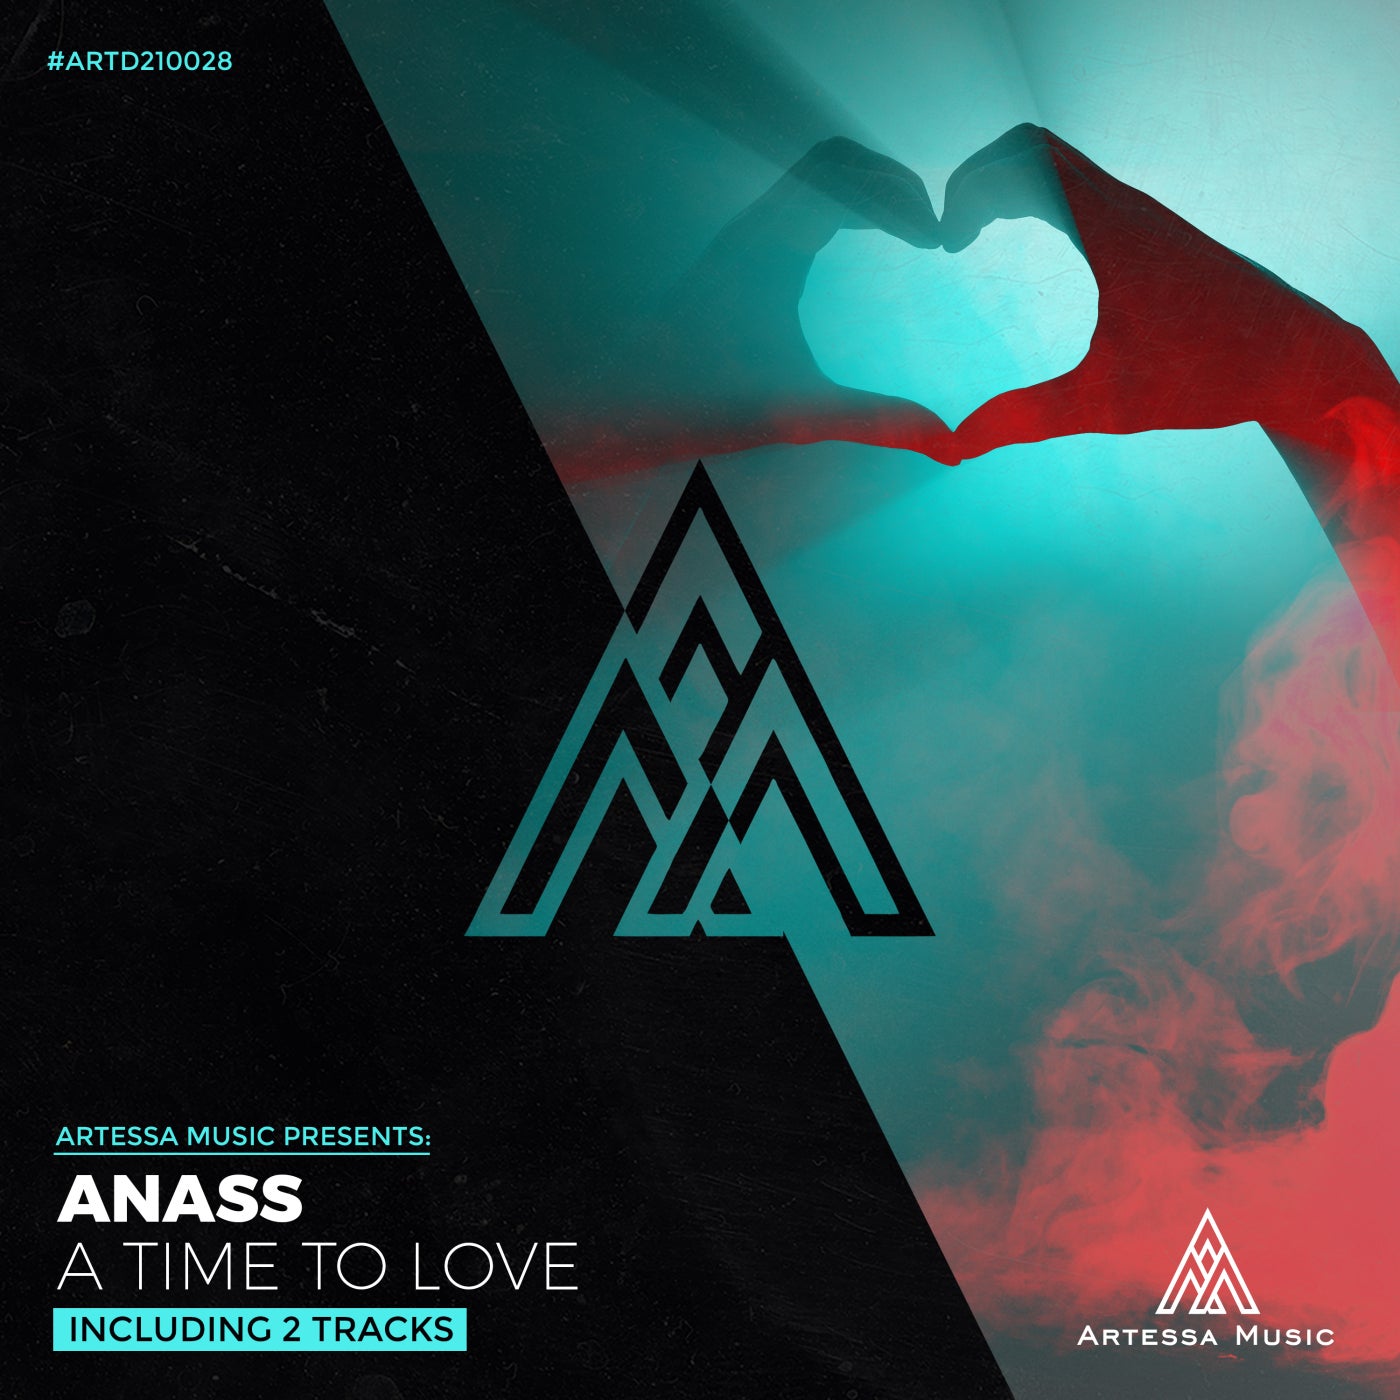 Anass (Re:Creation) – A Time to Love [ARTD210028]